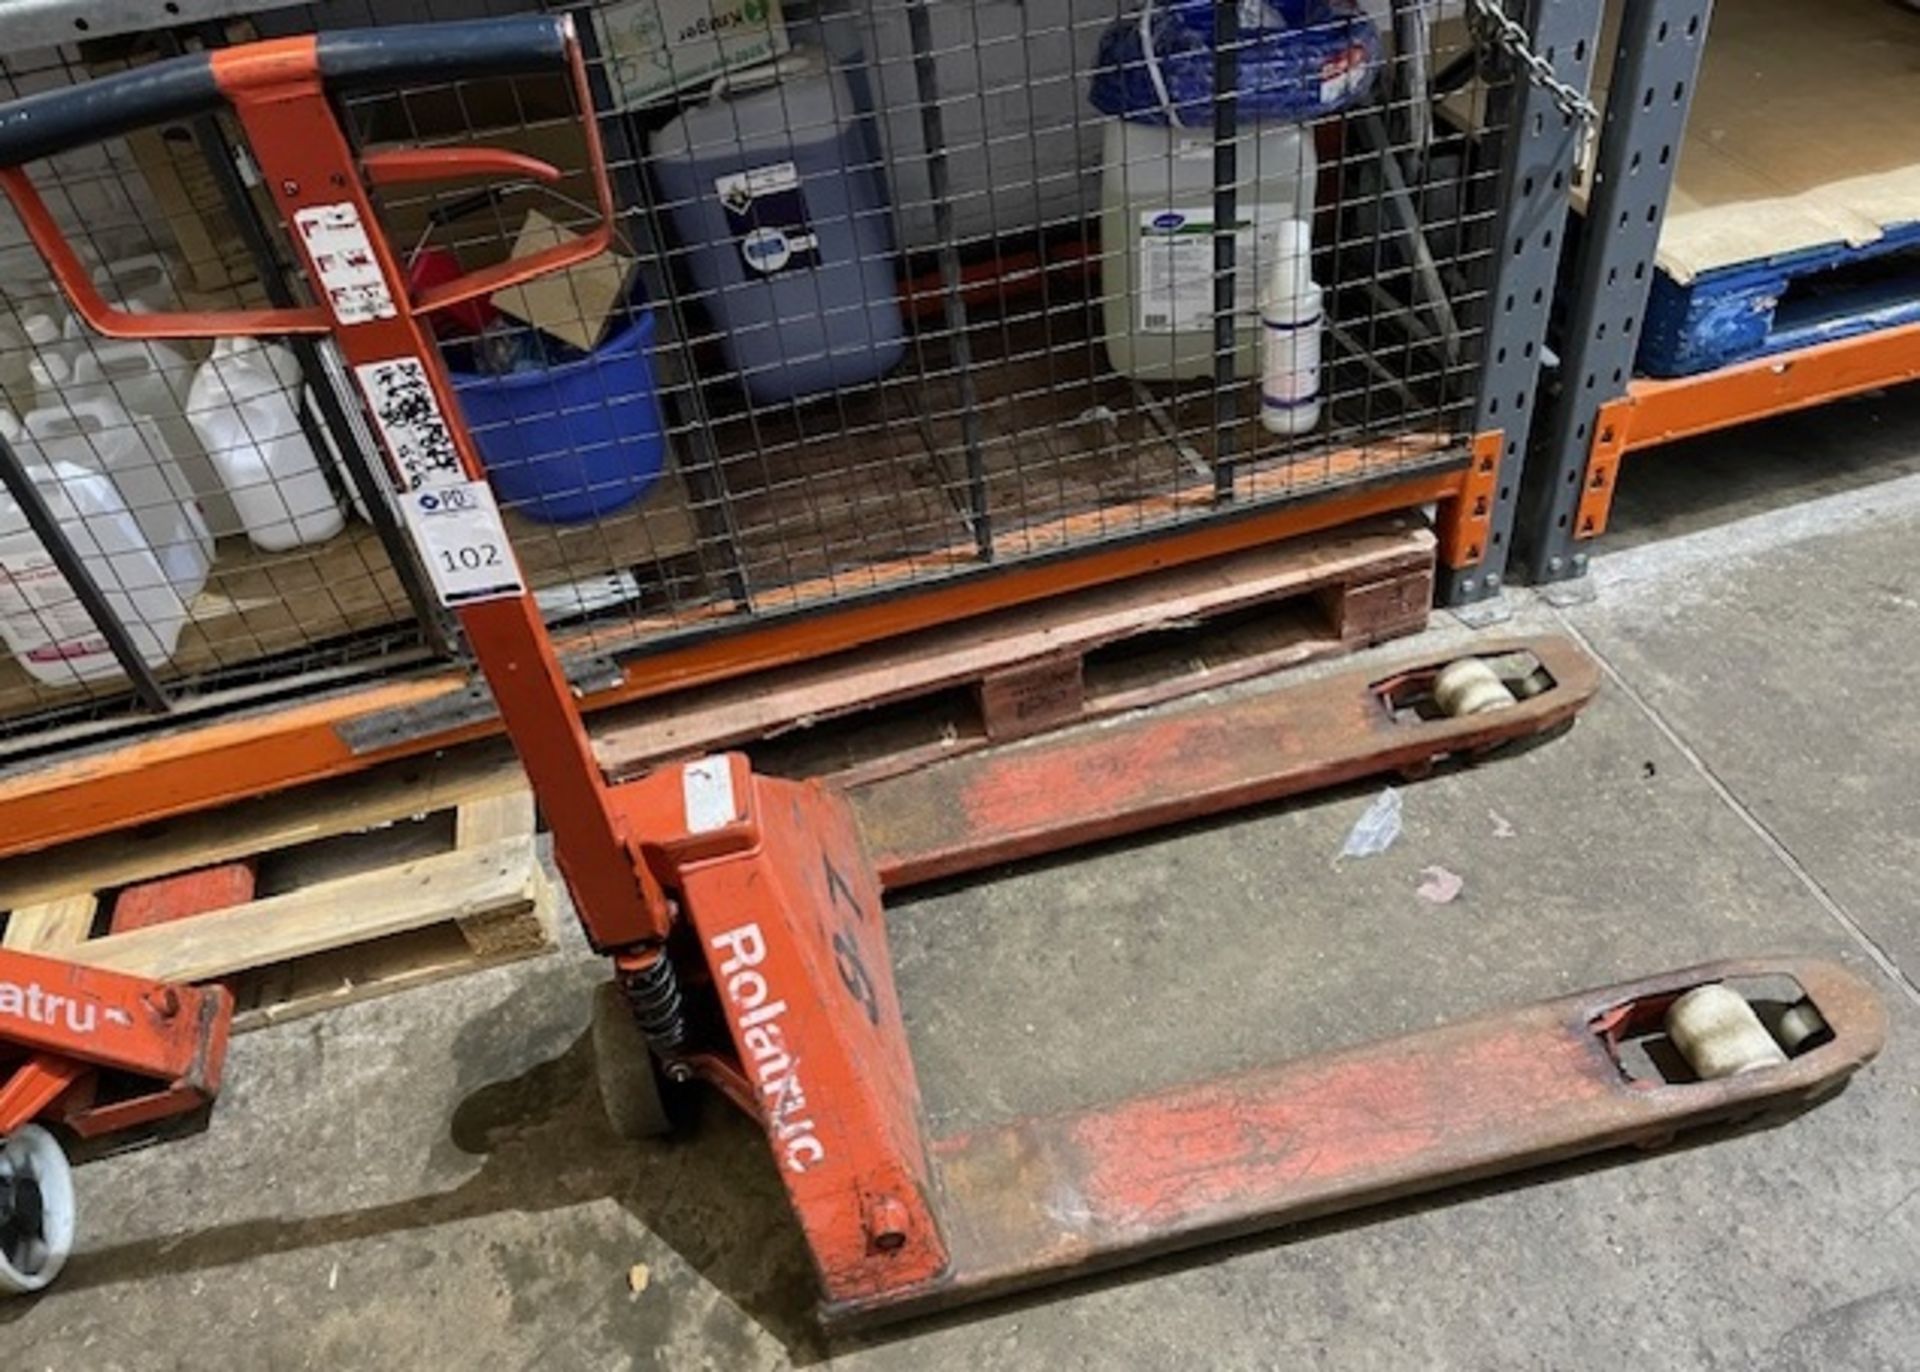 BT Rolatruc Hydraulic Wide Fork Pallet Truck (Location: NW London. Please Refer to General Notes)